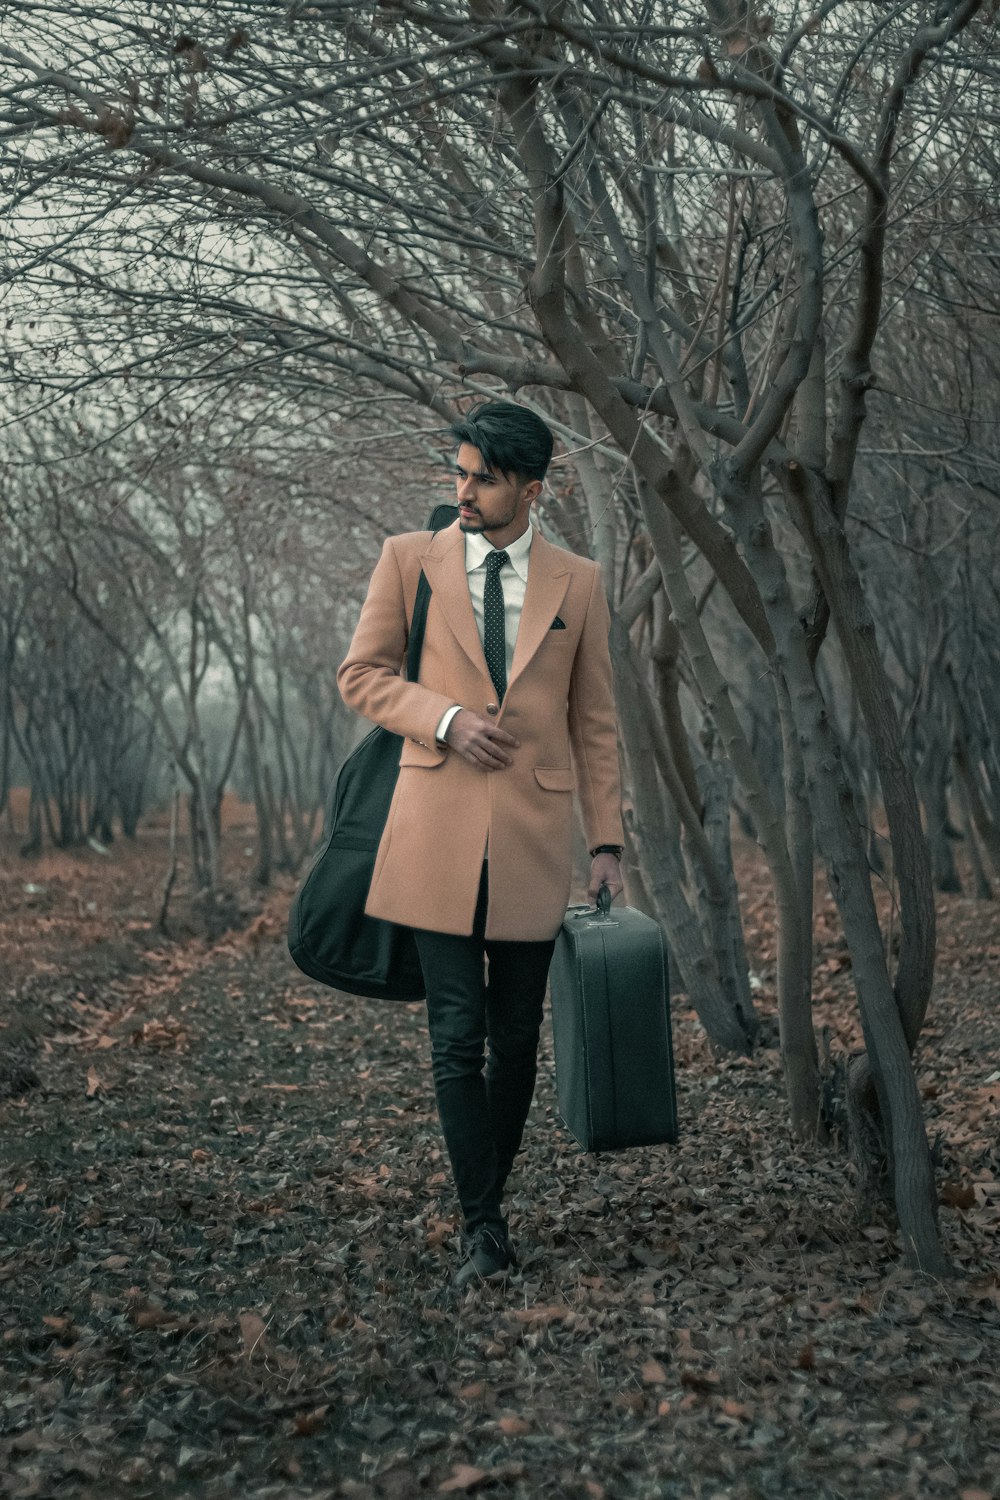 a man walking through a forest carrying a suitcase